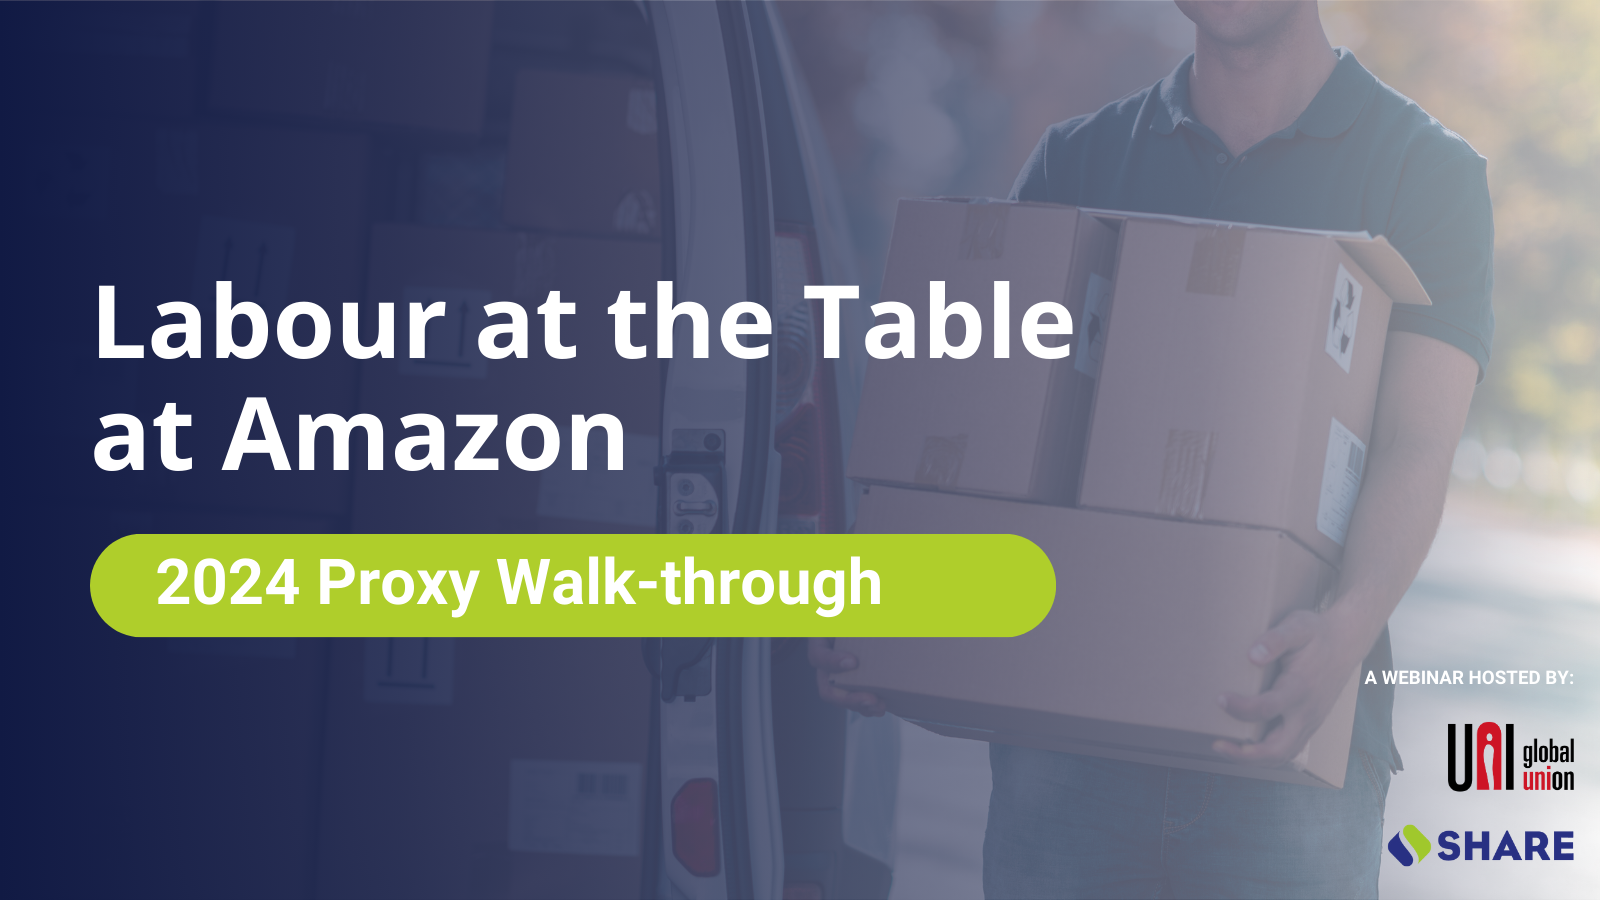 A graphic promoting the webinar "Labour at the Table at Amazon."